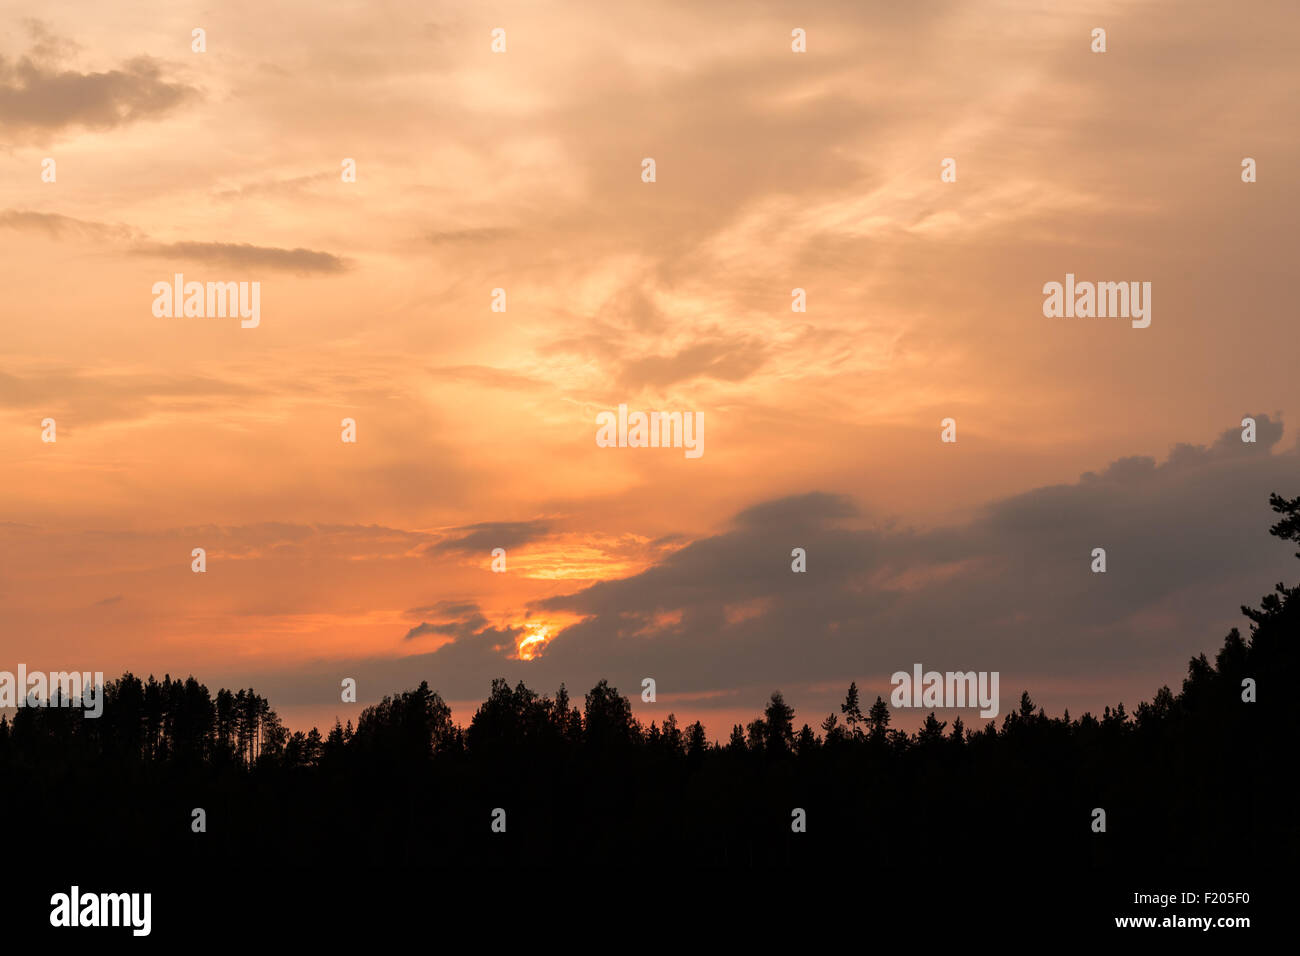 Fiery sunset and silhouette forest Stock Photo